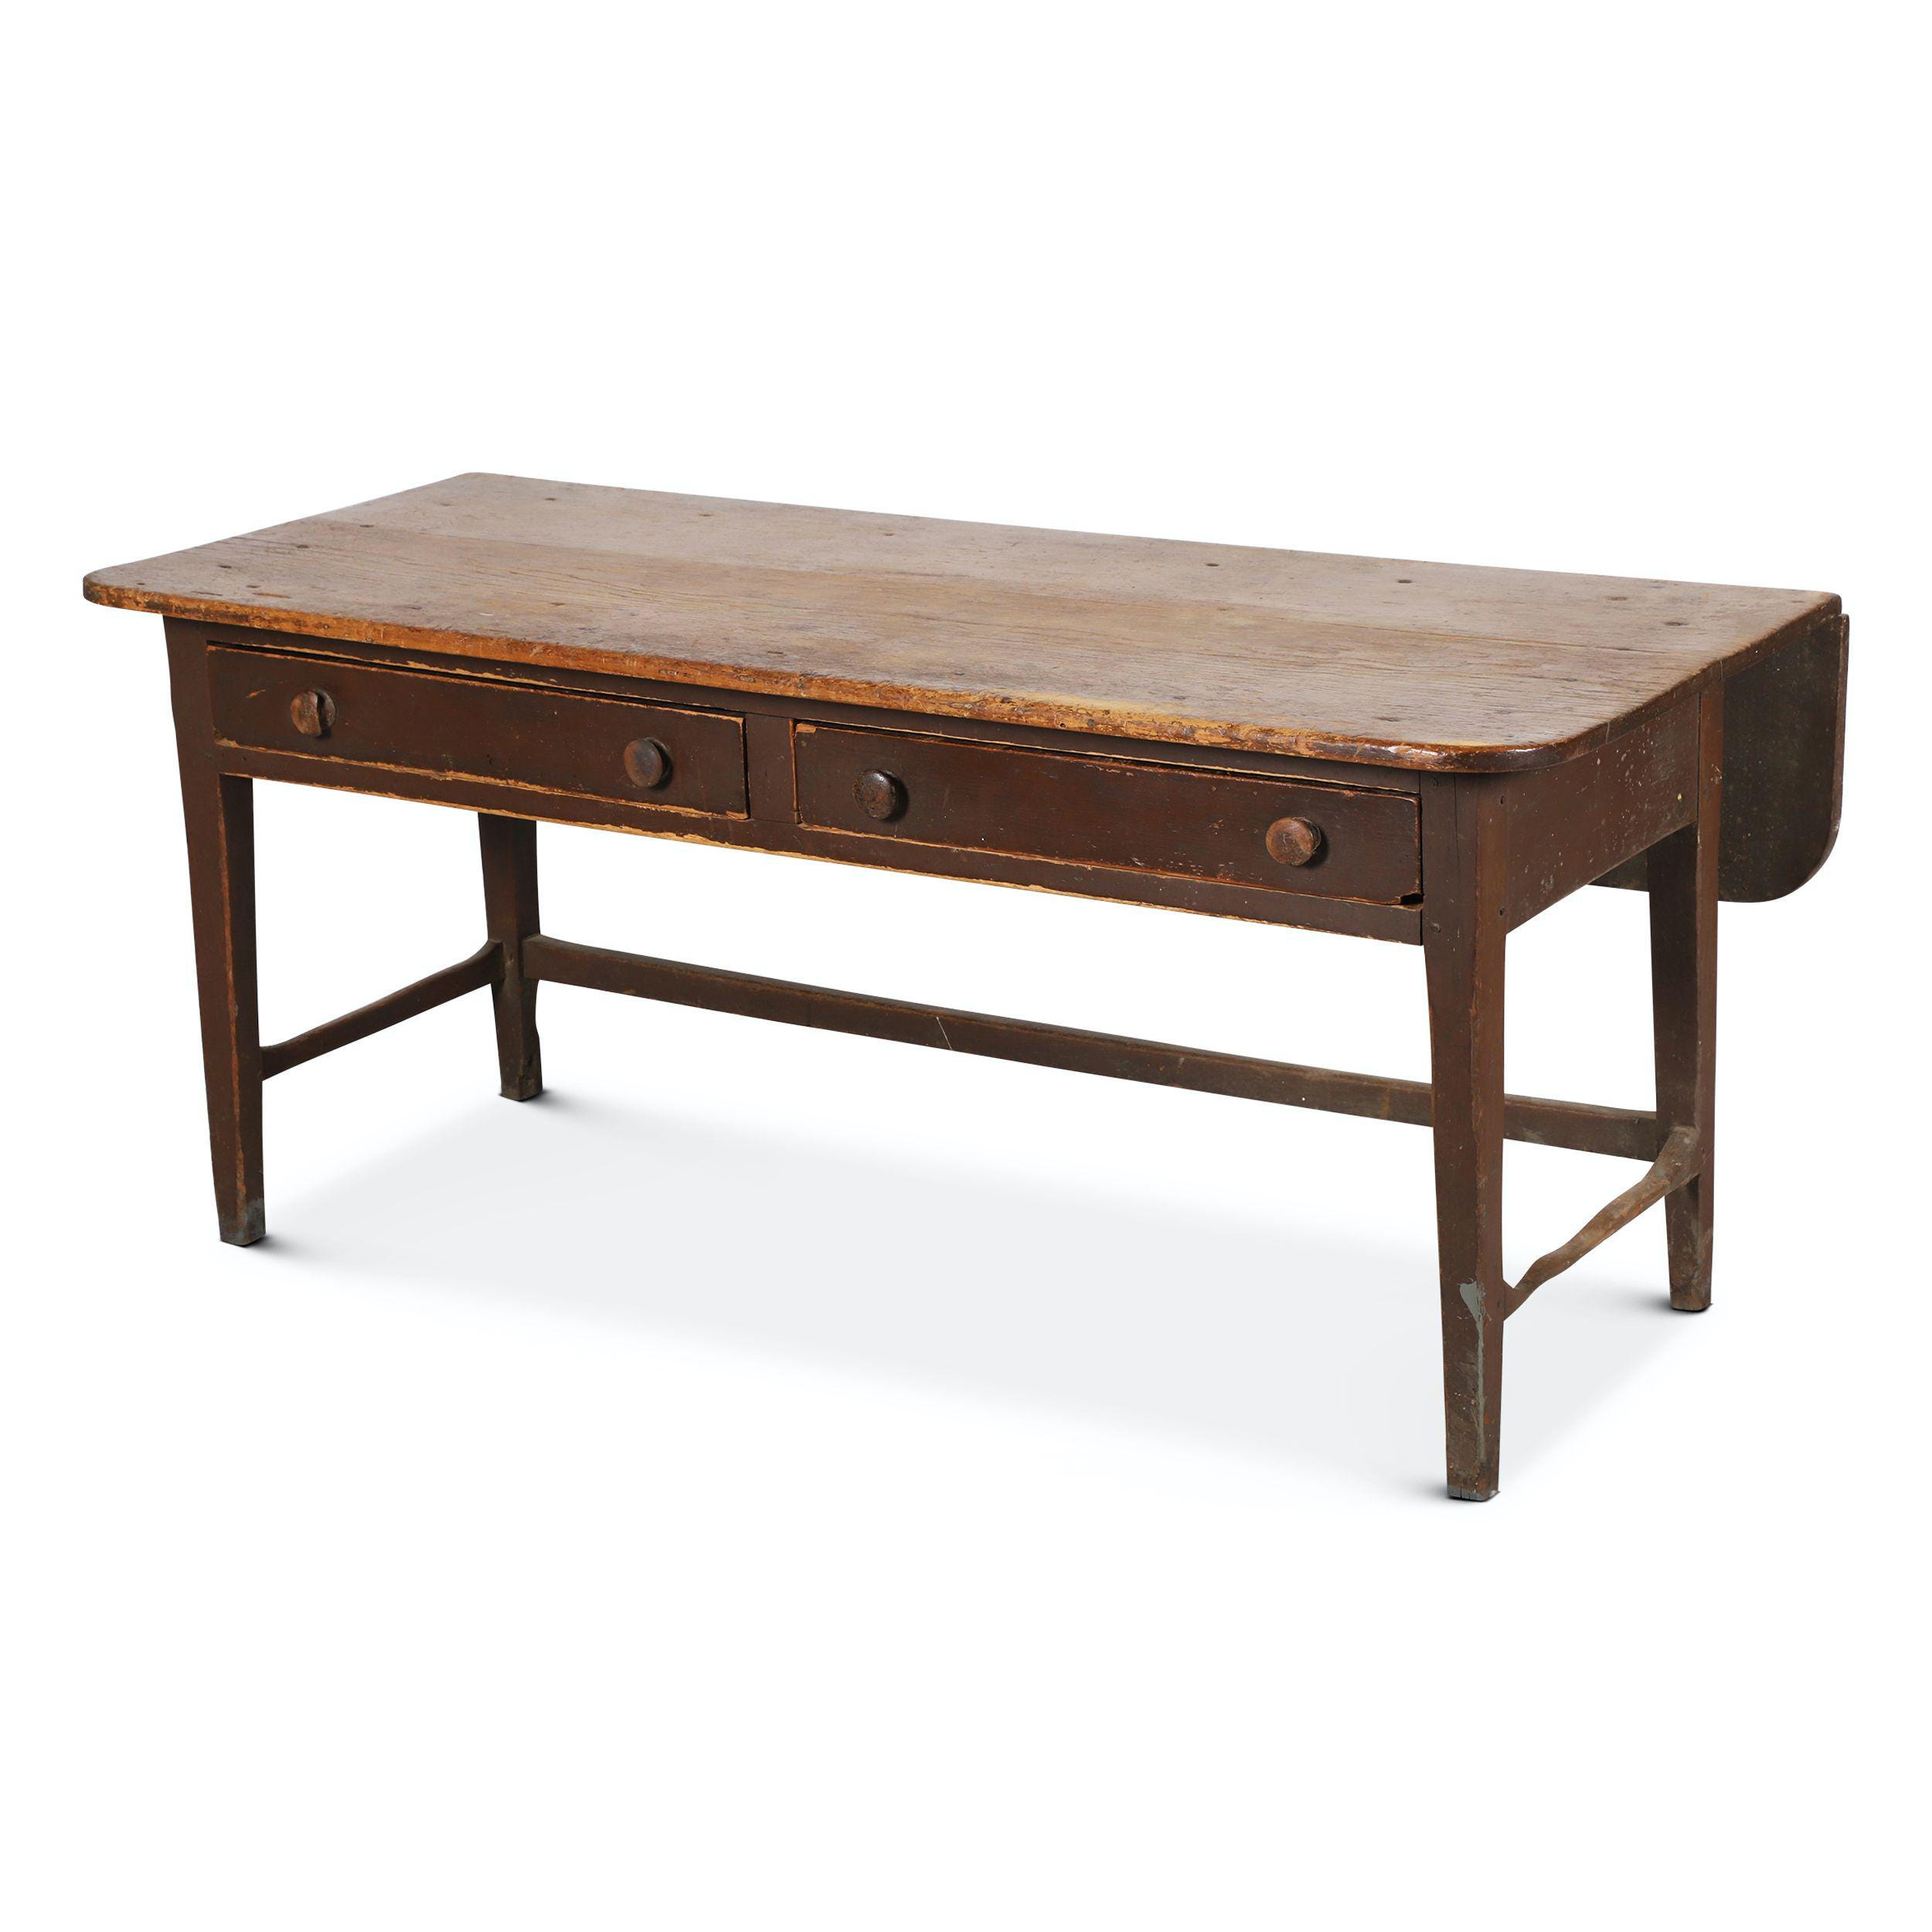 Early 19th century Ontario harvest table in original red-brown paint, estimated at $2,500-$3,500.